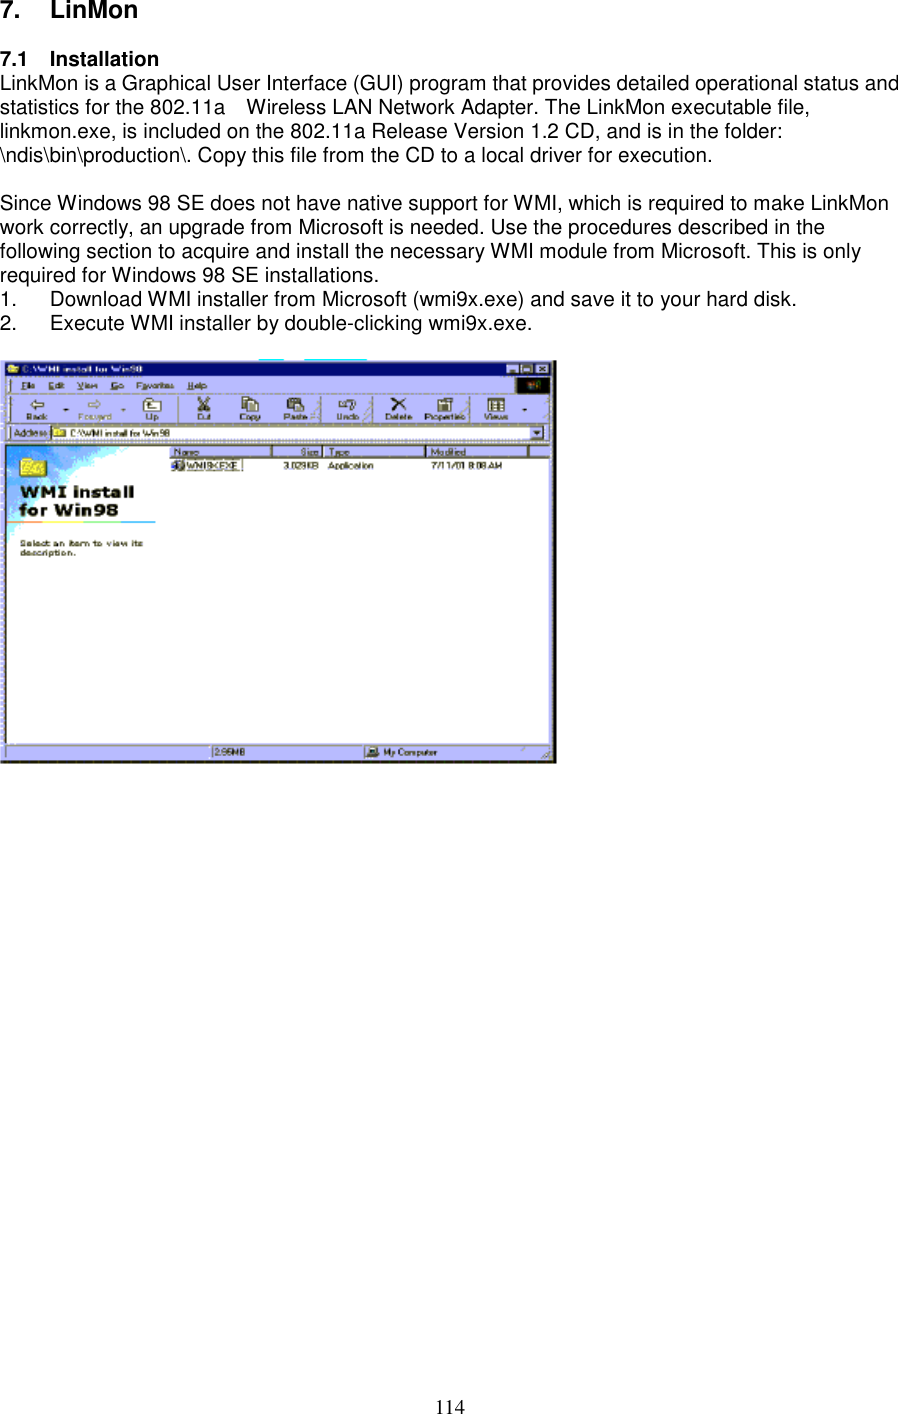 1147. LinMon7.1 InstallationLinkMon is a Graphical User Interface (GUI) program that provides detailed operational status andstatistics for the 802.11a    Wireless LAN Network Adapter. The LinkMon executable file,linkmon.exe, is included on the 802.11a Release Version 1.2 CD, and is in the folder:\ndis\bin\production\. Copy this file from the CD to a local driver for execution.Since Windows 98 SE does not have native support for WMI, which is required to make LinkMonwork correctly, an upgrade from Microsoft is needed. Use the procedures described in thefollowing section to acquire and install the necessary WMI module from Microsoft. This is onlyrequired for Windows 98 SE installations.1.  Download WMI installer from Microsoft (wmi9x.exe) and save it to your hard disk.2.  Execute WMI installer by double-clicking wmi9x.exe.